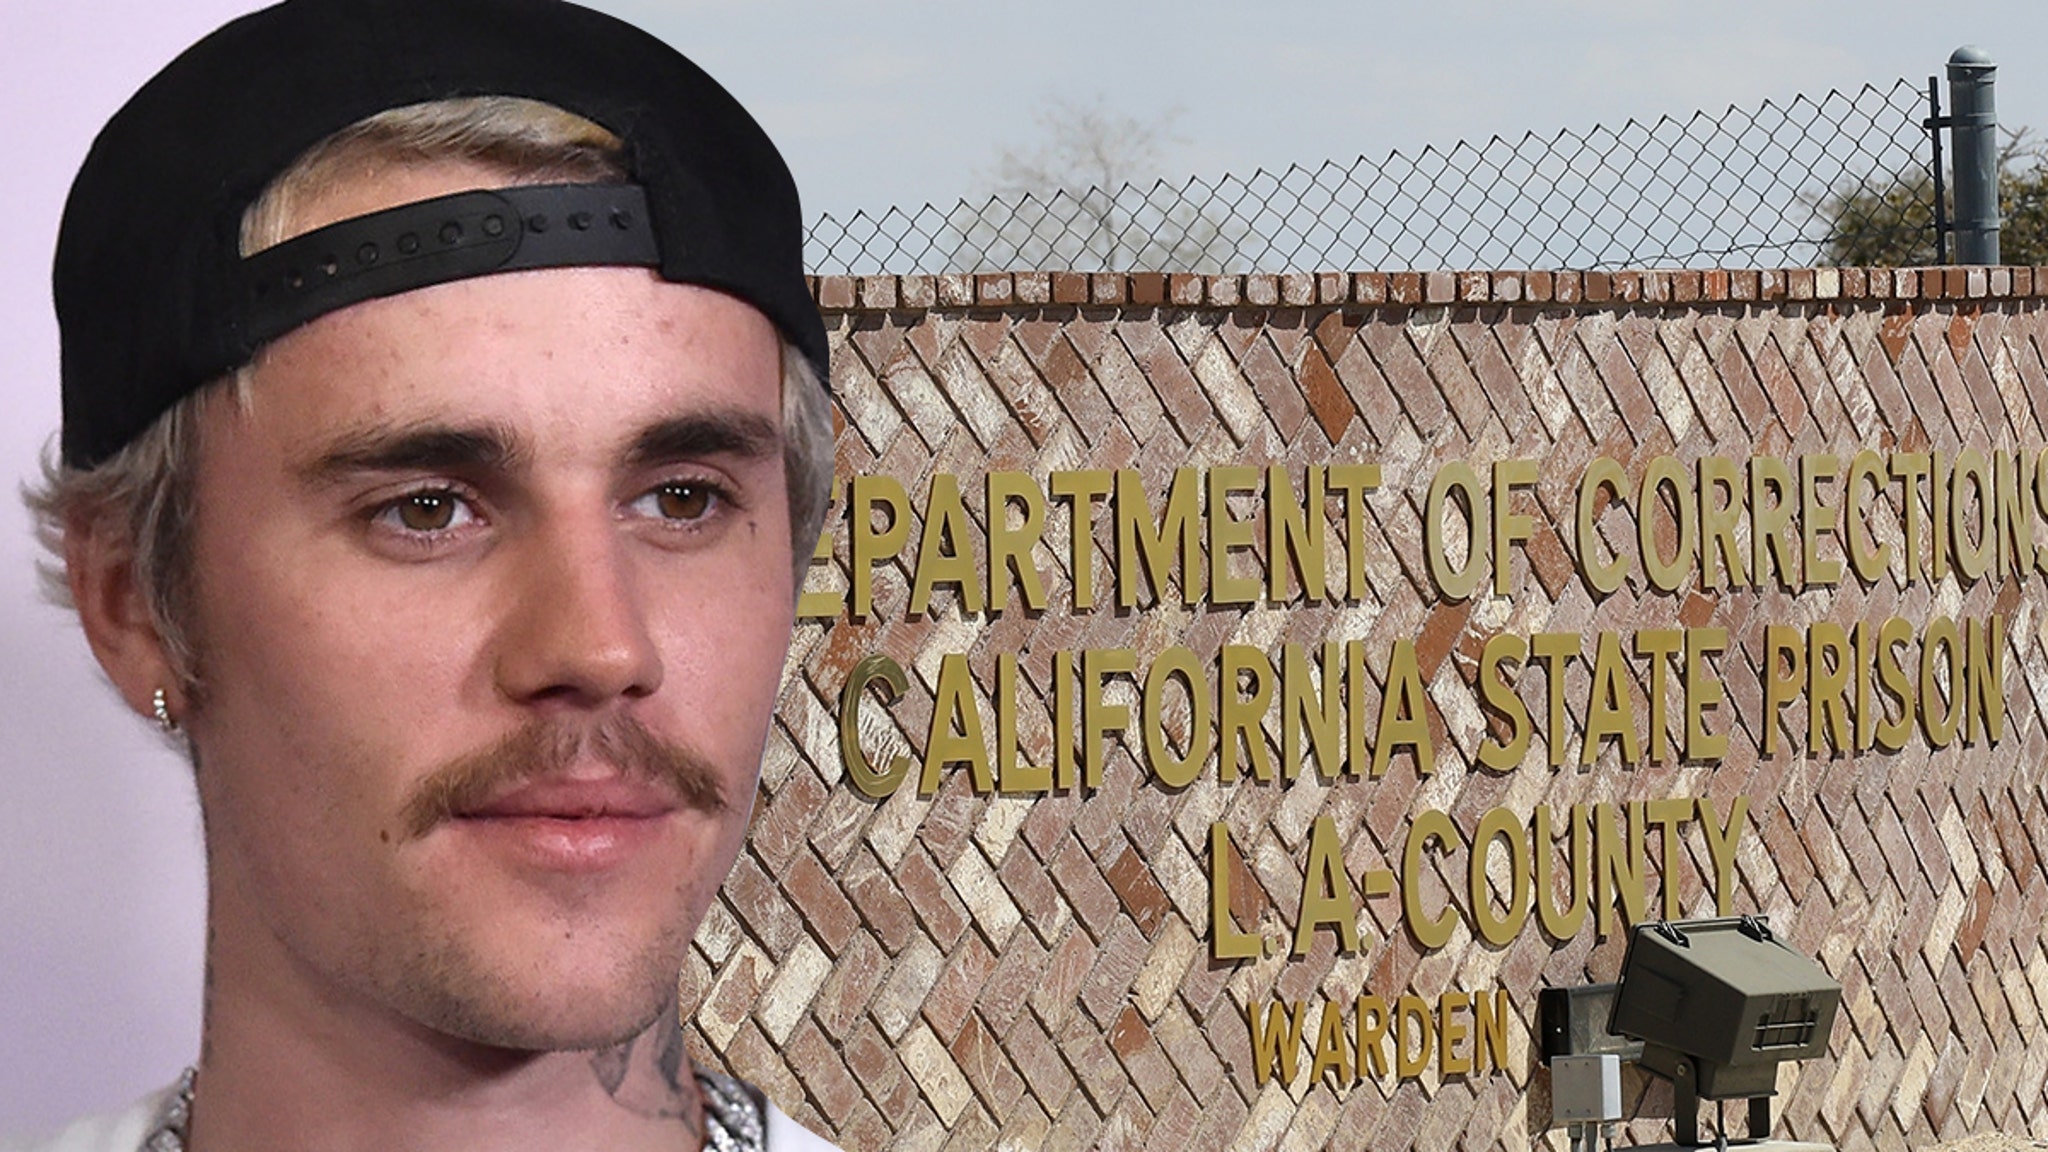 Justin Bieber visits Los Angeles prison to spread the word of God